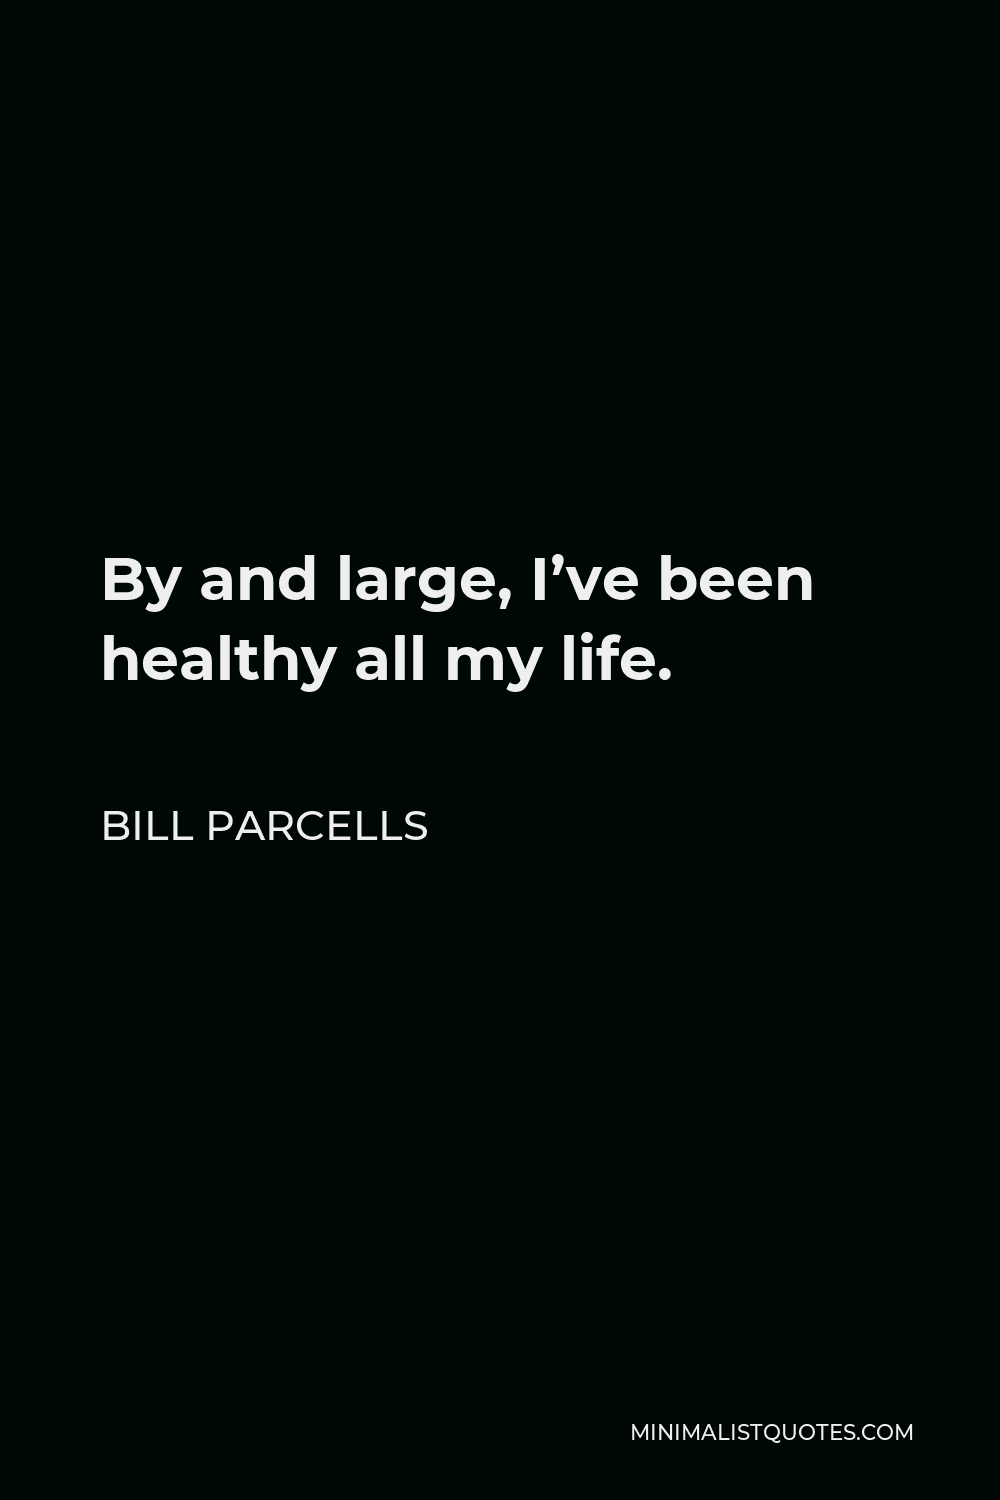 Bill Parcells Quote - By and large, I’ve been healthy all my life.